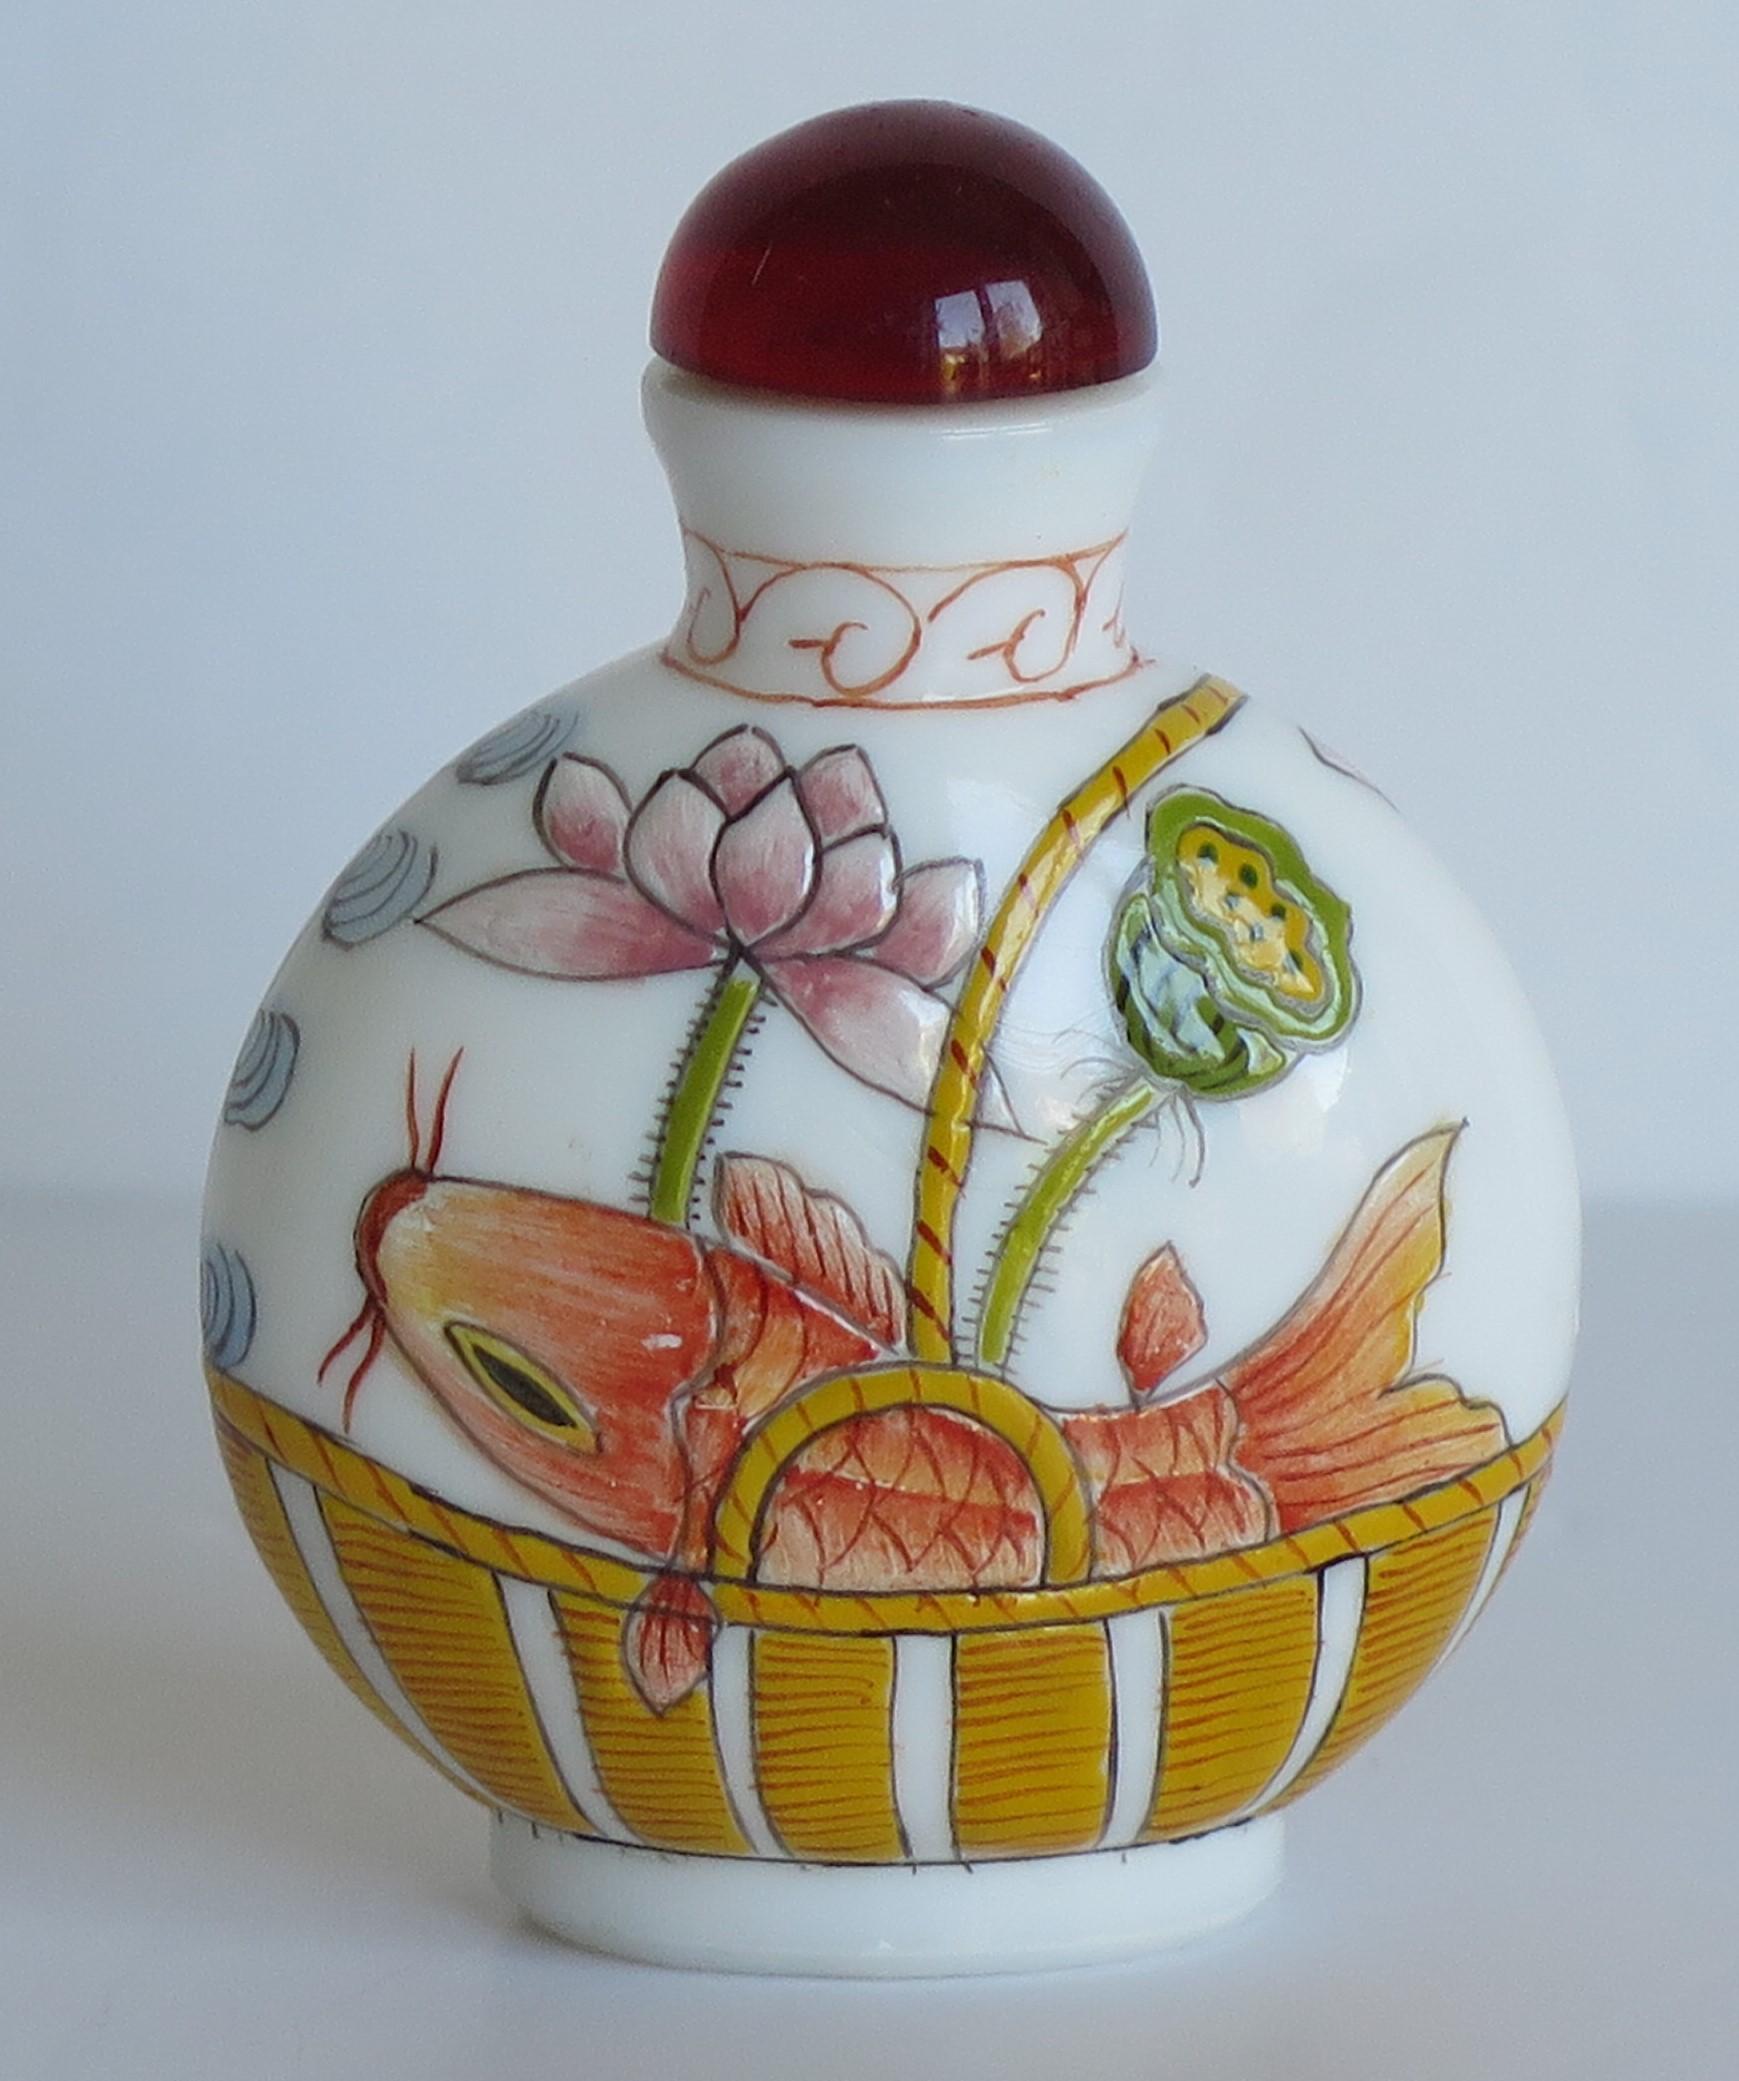 This is a very good Chinese glass snuff bottle, beautifully hand enameled, which we date to the mid part of the 20th century, circa 1940.

It is made of a milky white opaque glass and sits on a low oval foot. The bottle has been delicately hand